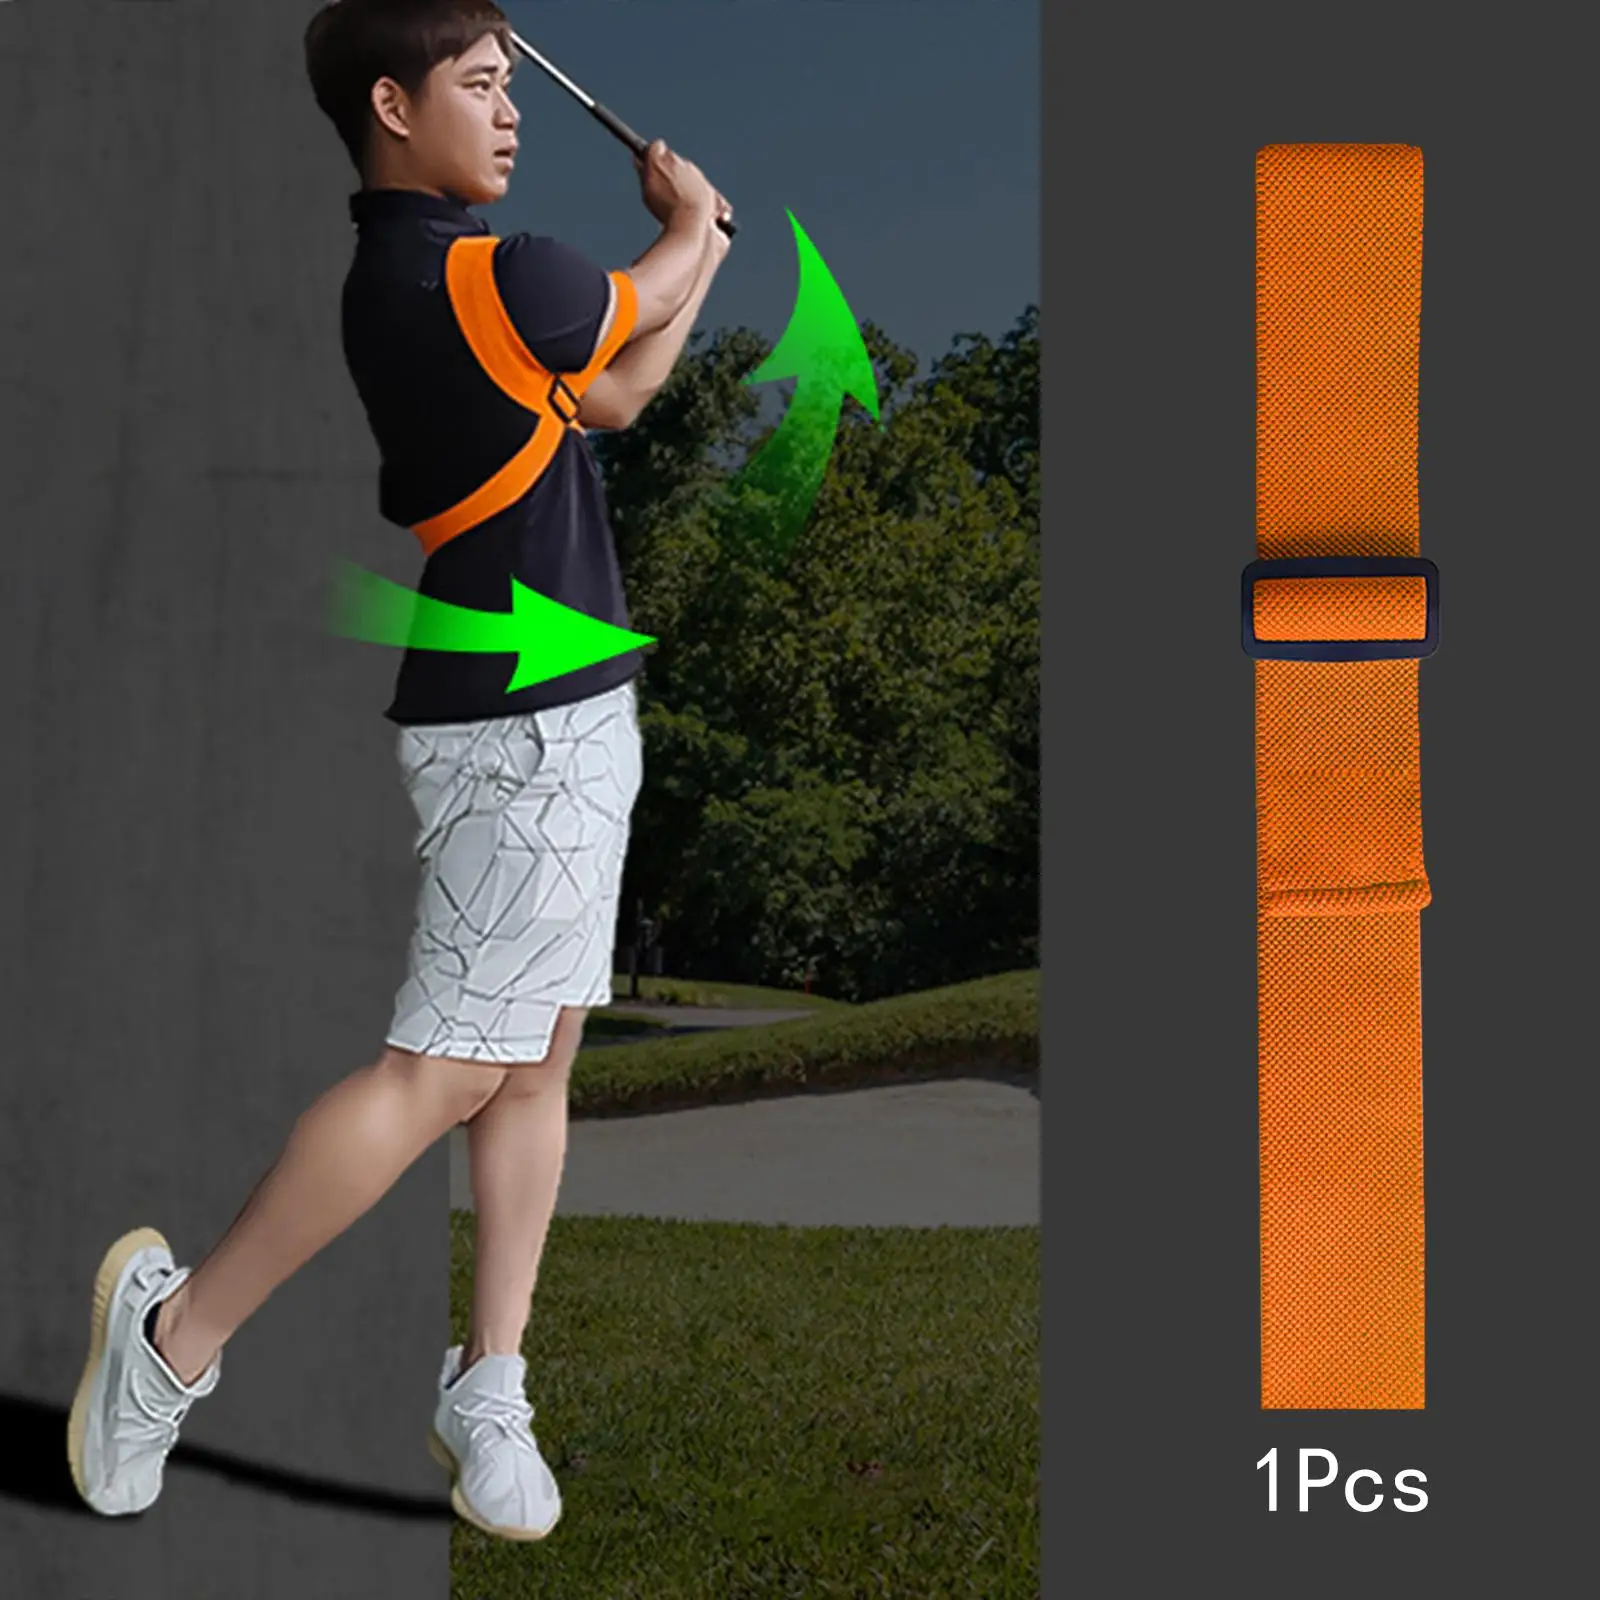 Golf Swing Trainer Bands Swing Correcting Practice Tool Softball Training Aid Forming The Correct Muscle Memory Equipment Gear